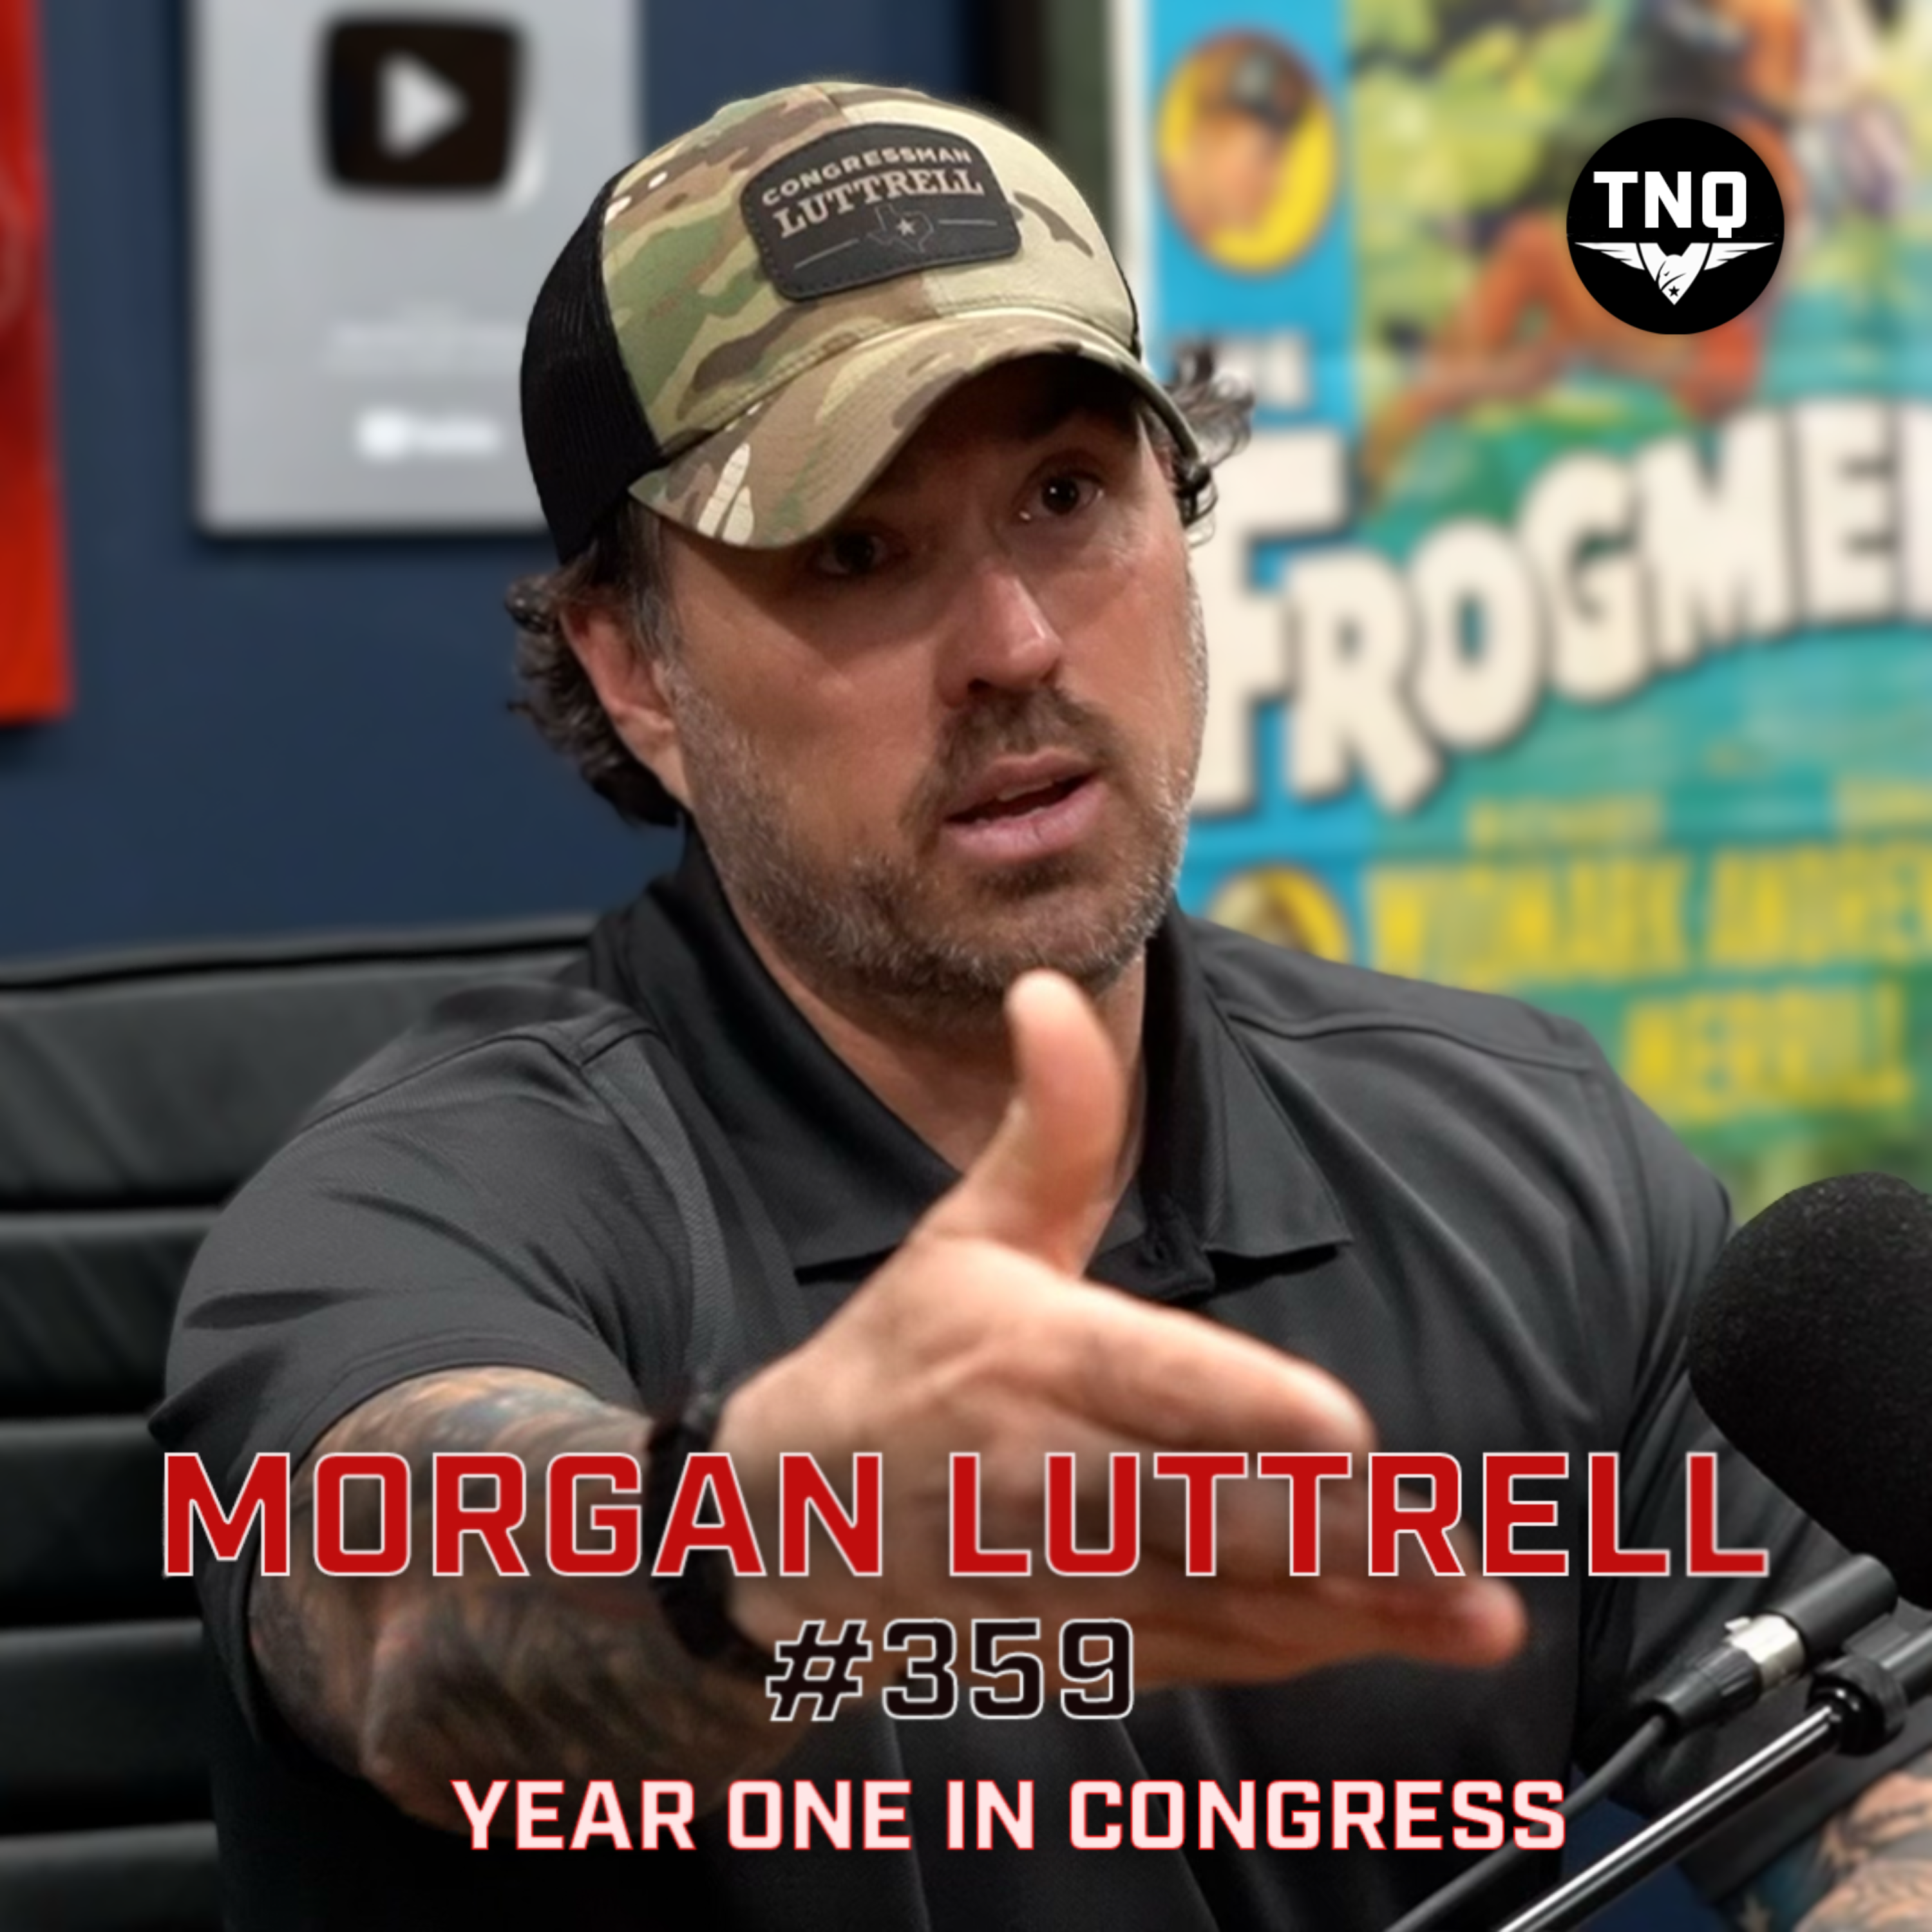 Morgan Luttrell: Rtd Navy SEAL Recaps His First Year In Congress, Behind The Scenes in DC